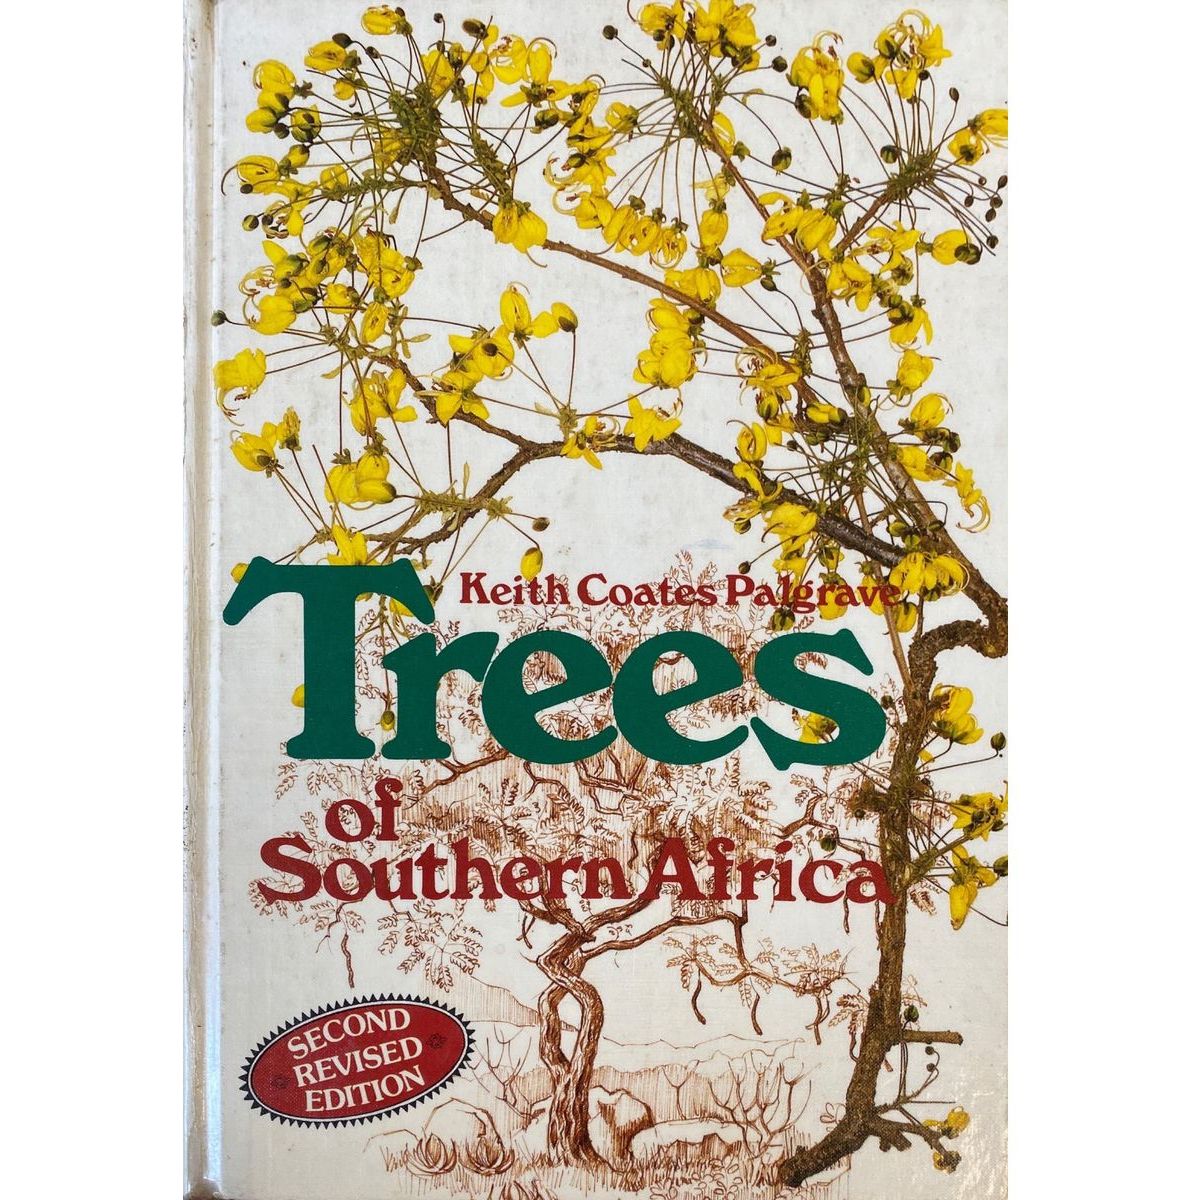 ISBN: 9780869770818 / 0869770810 - Trees of Southern Africa by Keith Coates Palgrave, R.B. Drummond & Eugene John Moll, 1st Edition [1977]